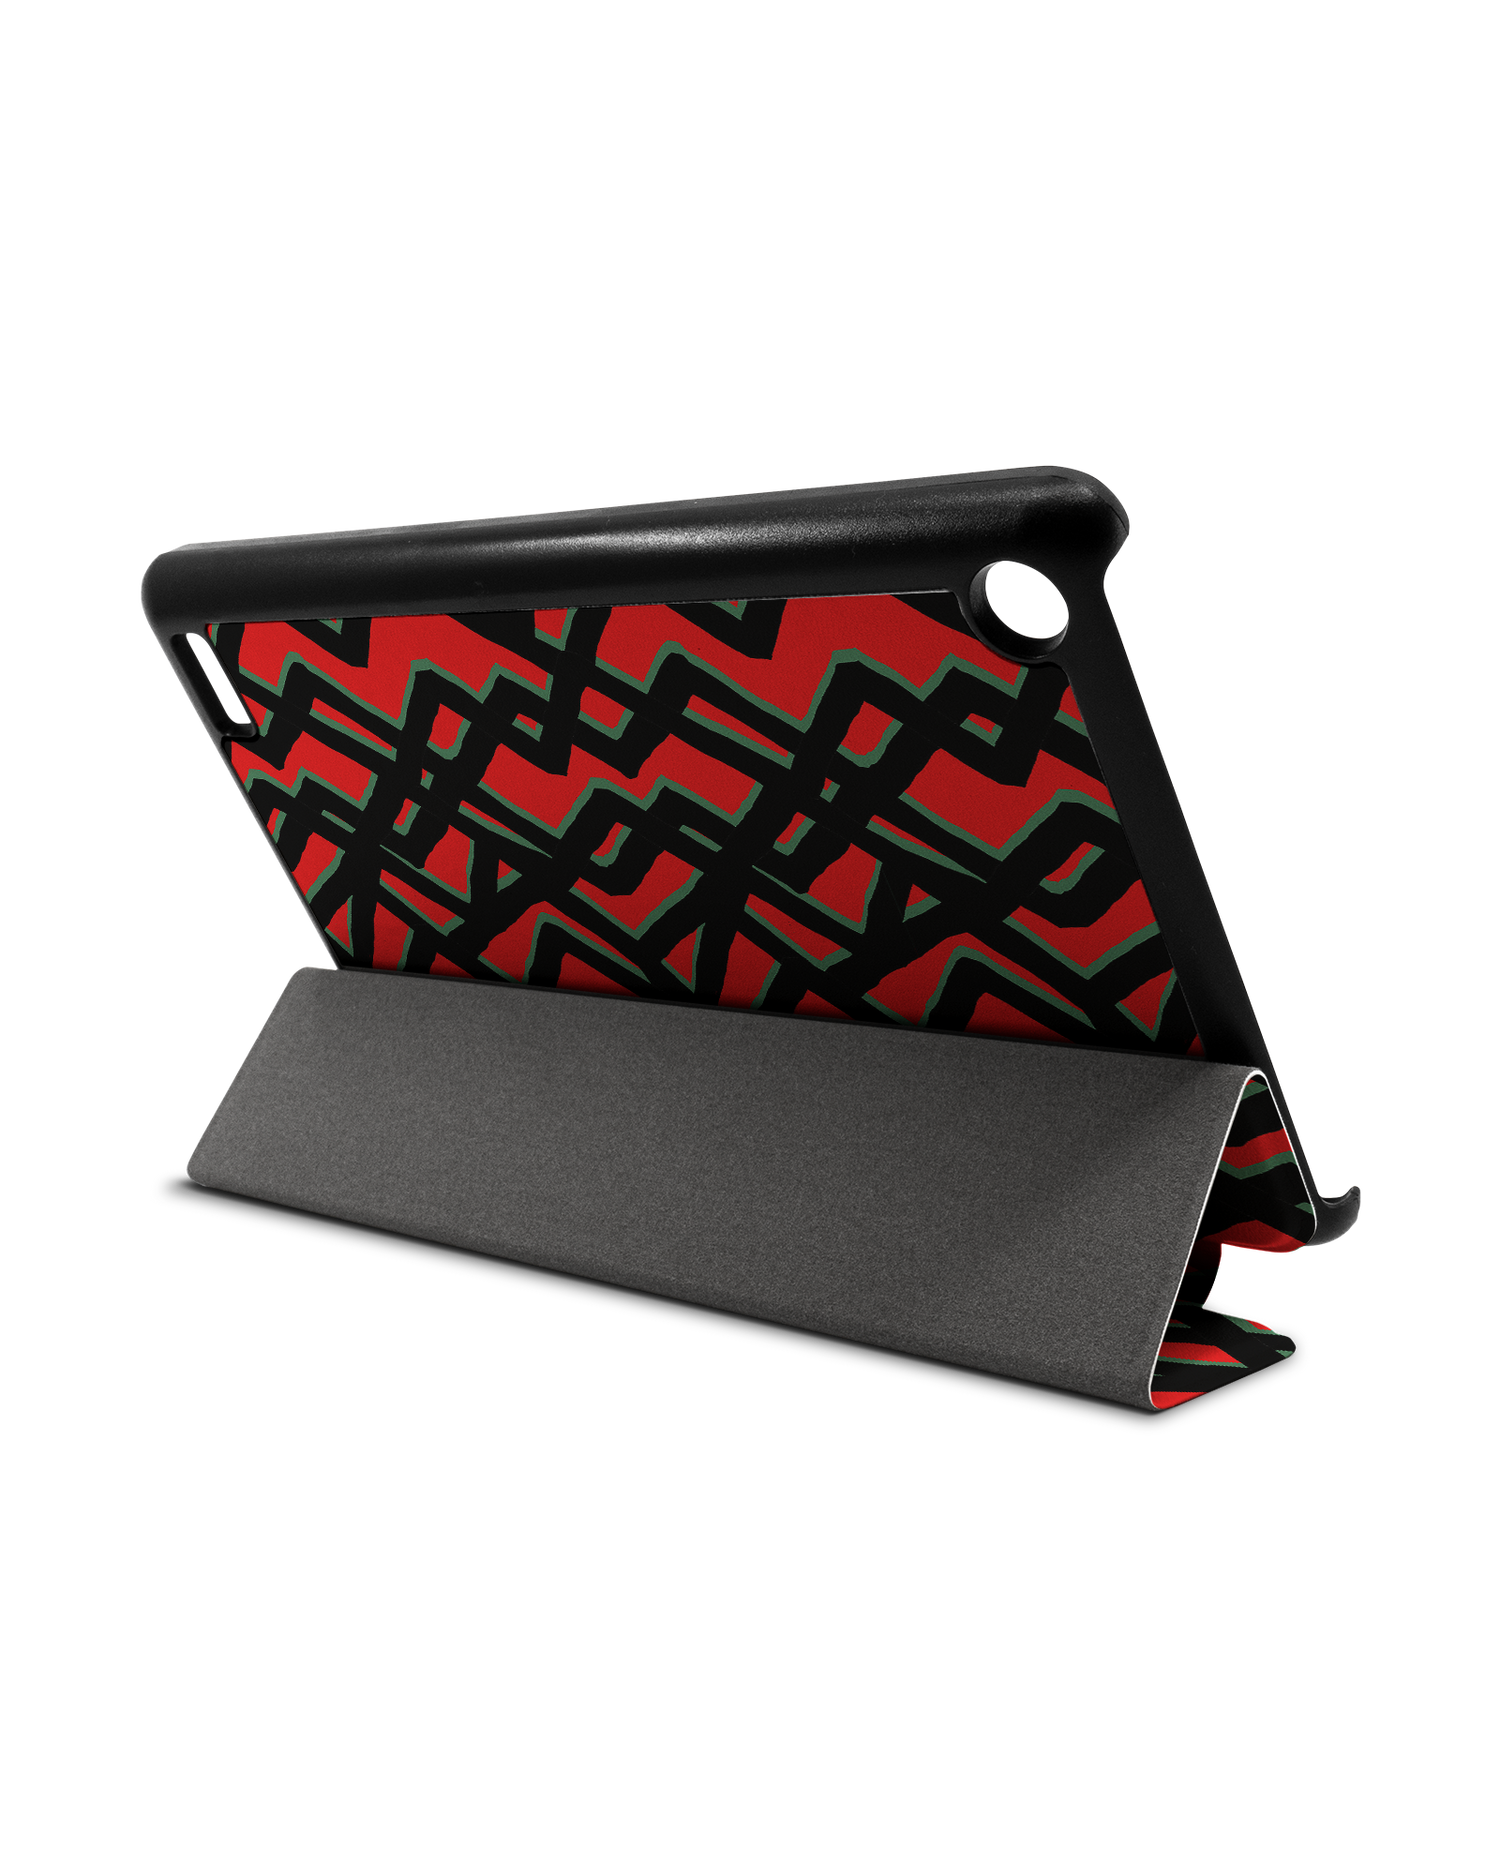 Fences Pattern Tablet Smart Case for Amazon Fire 7: Used as Stand